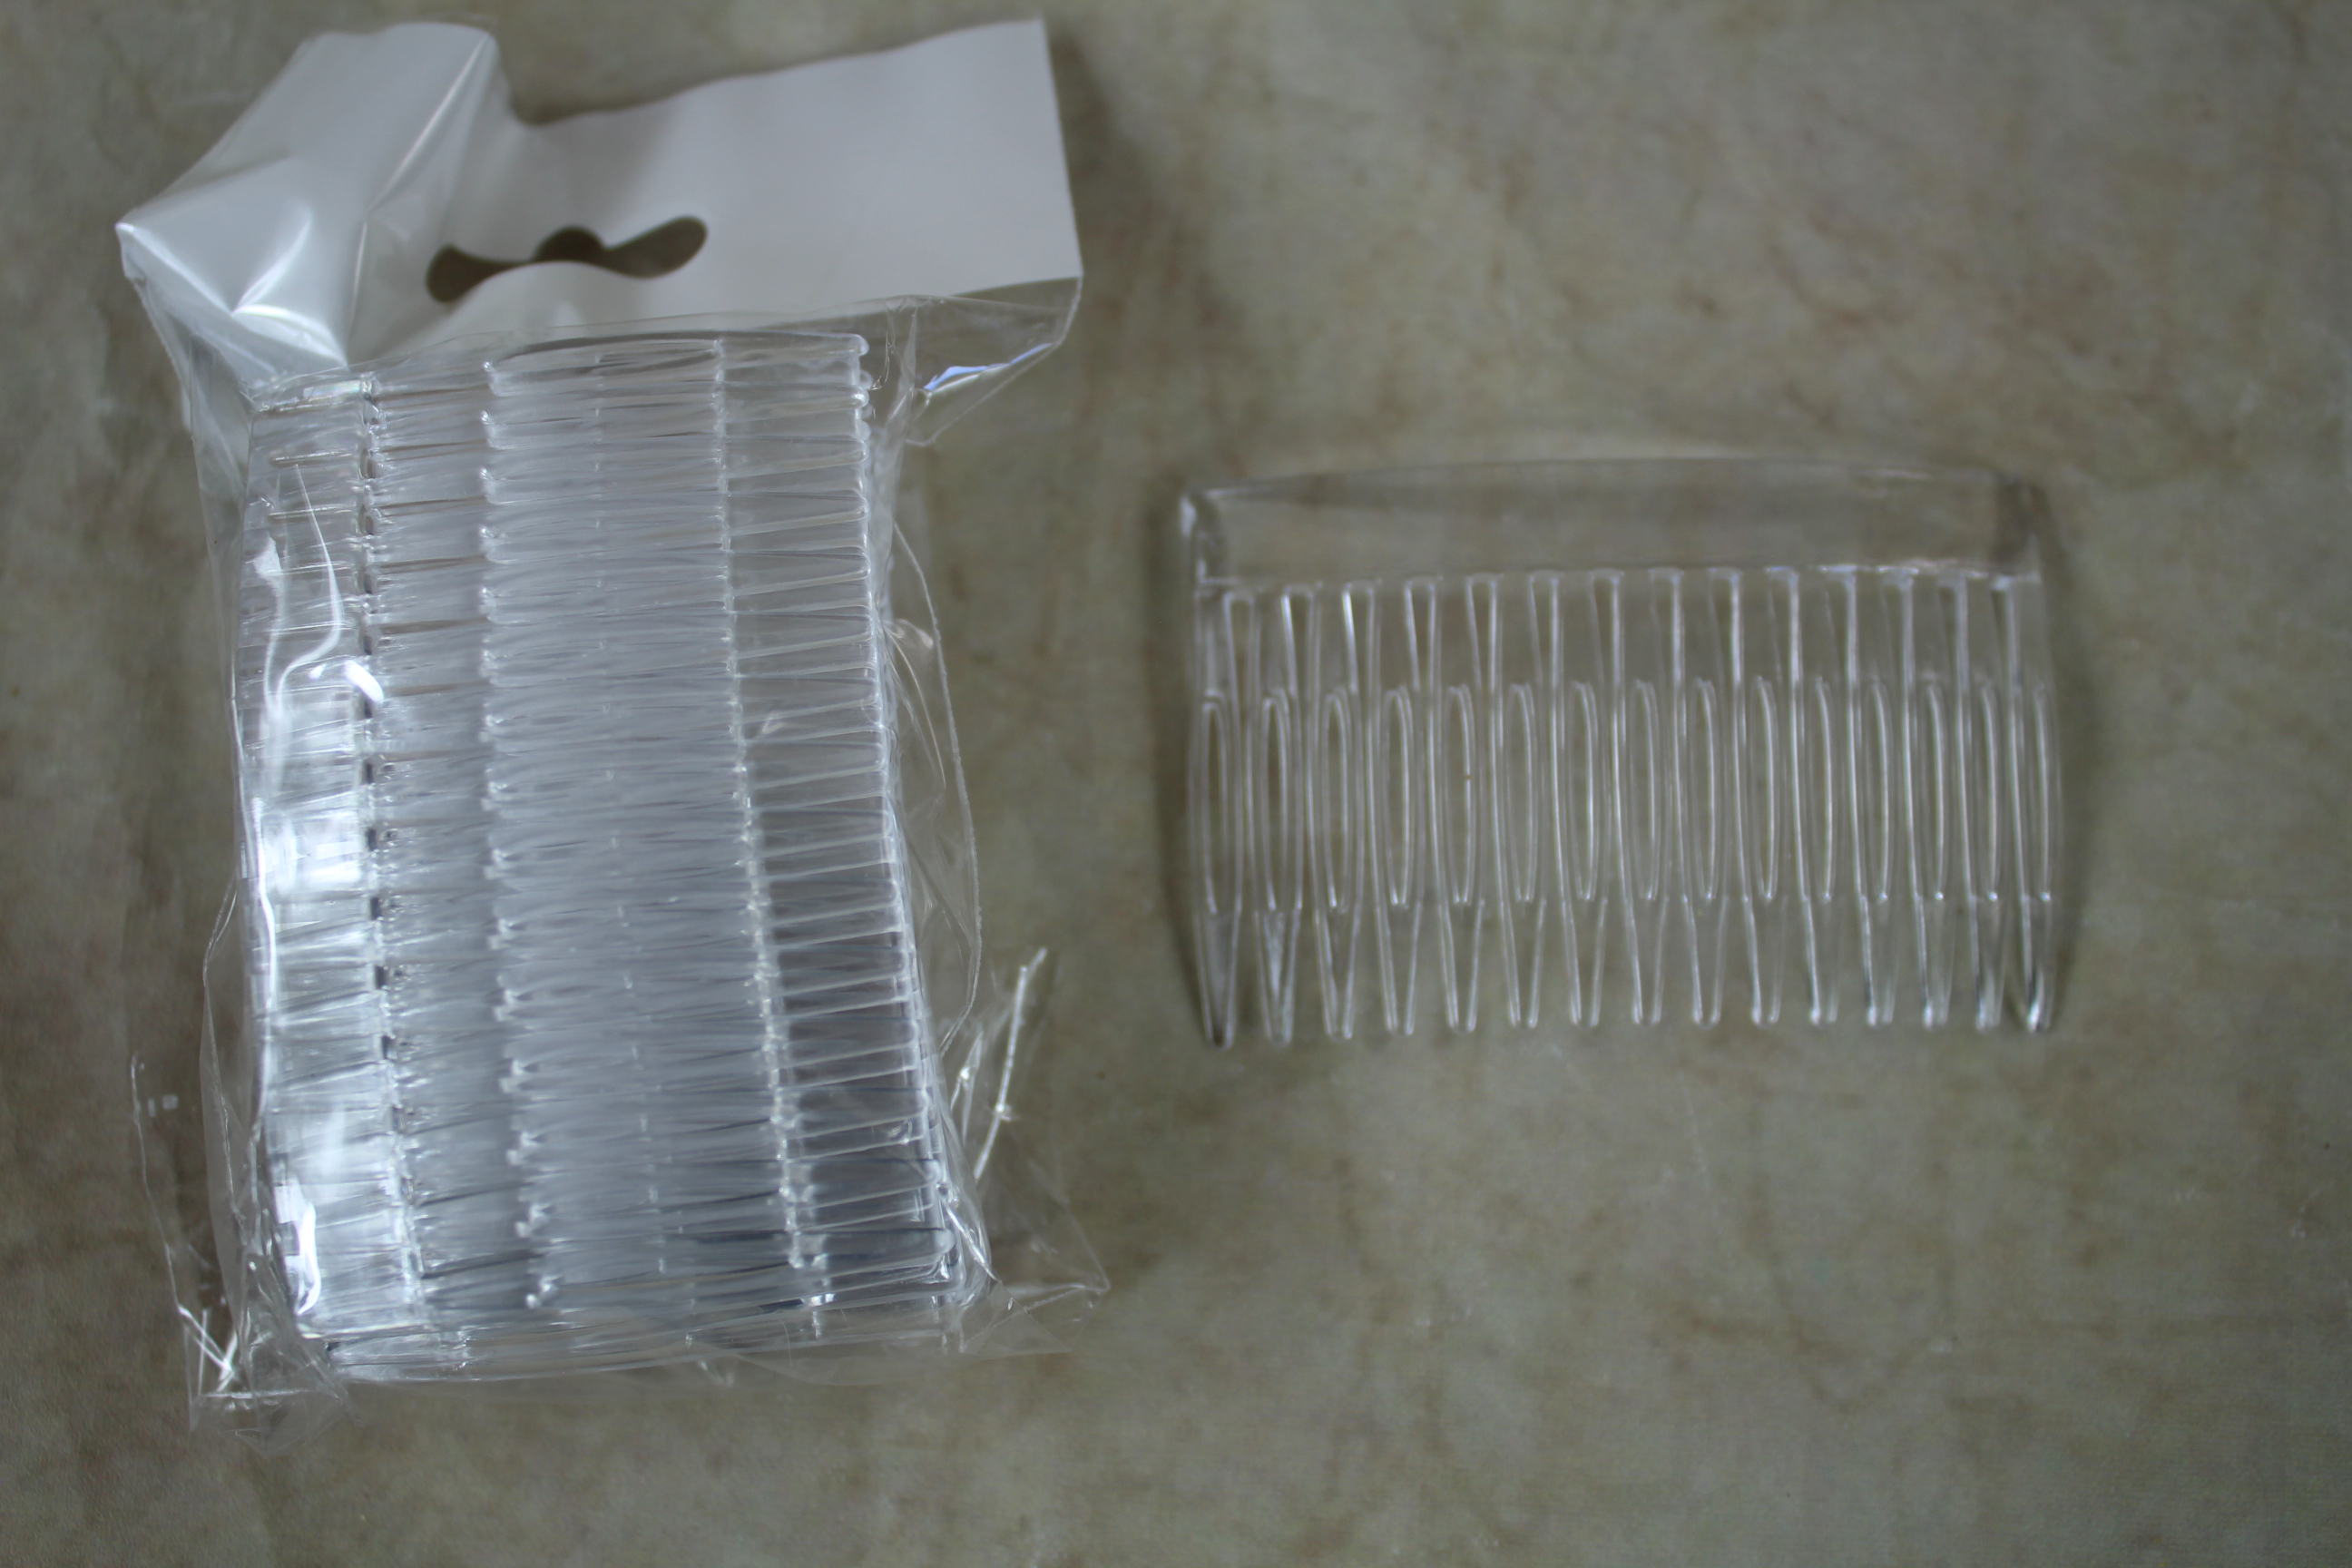 48 x 70x45mm clear plastic 15 tooth comb